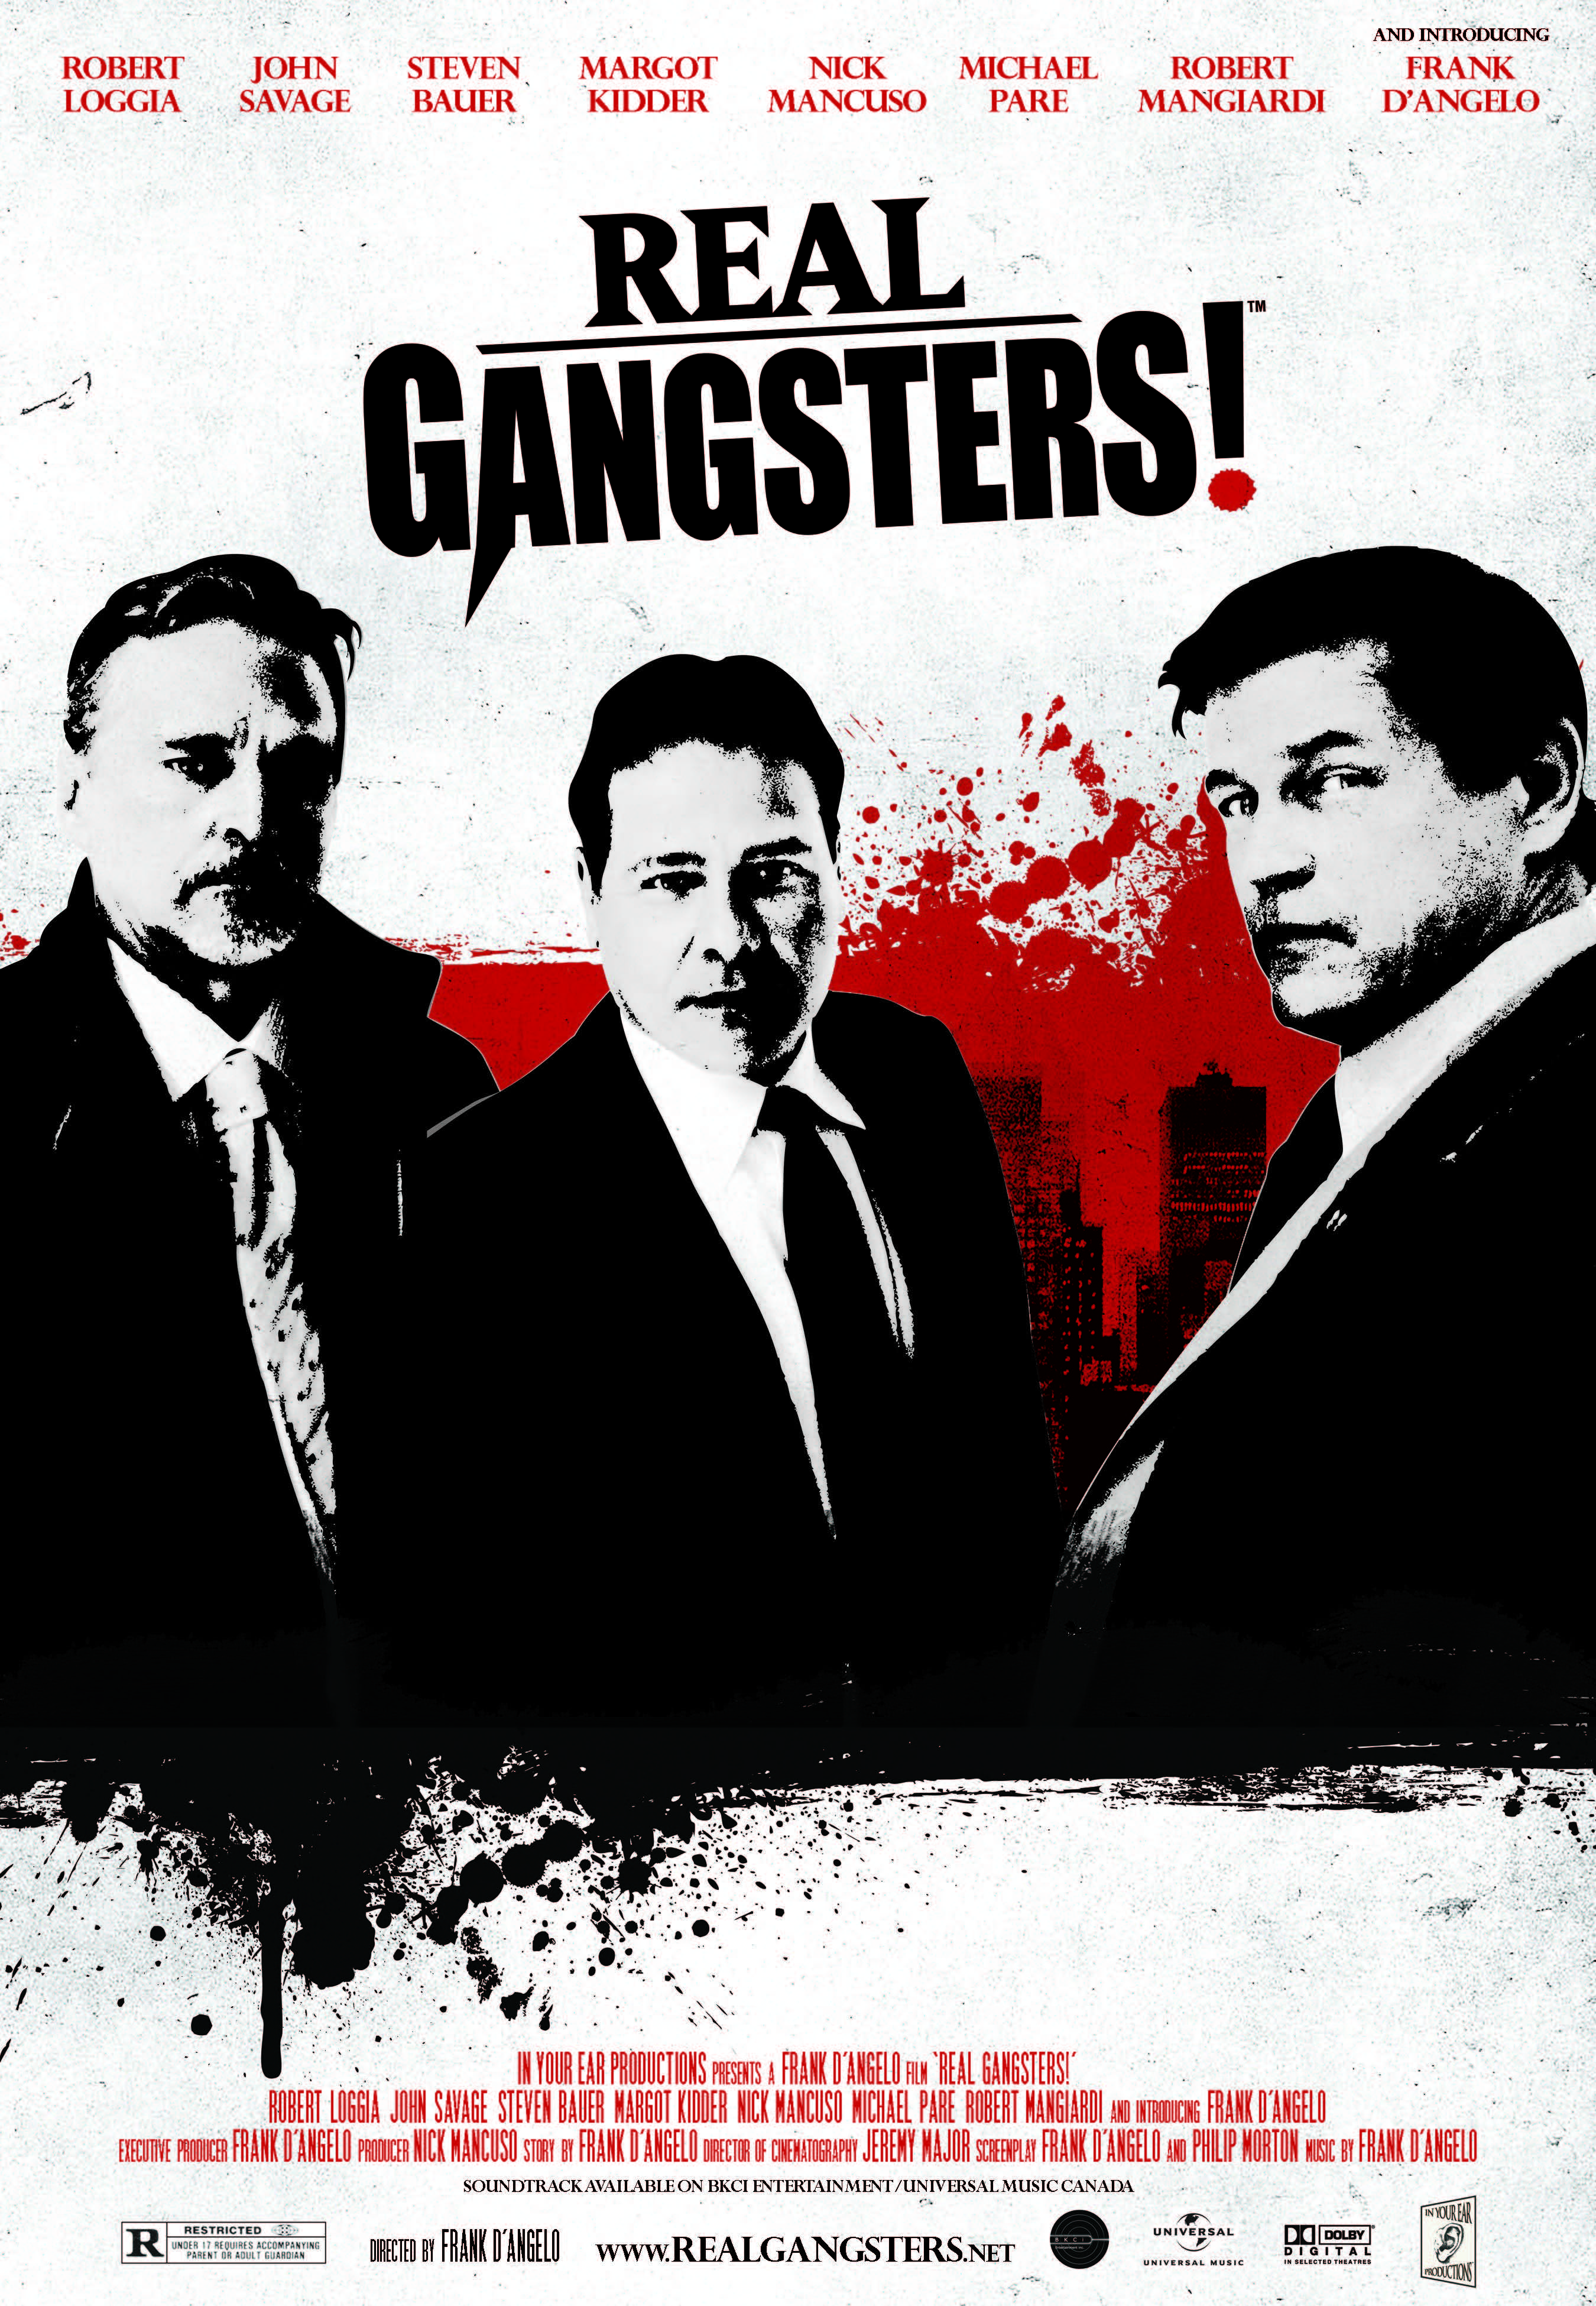 Real Gangsters poster.